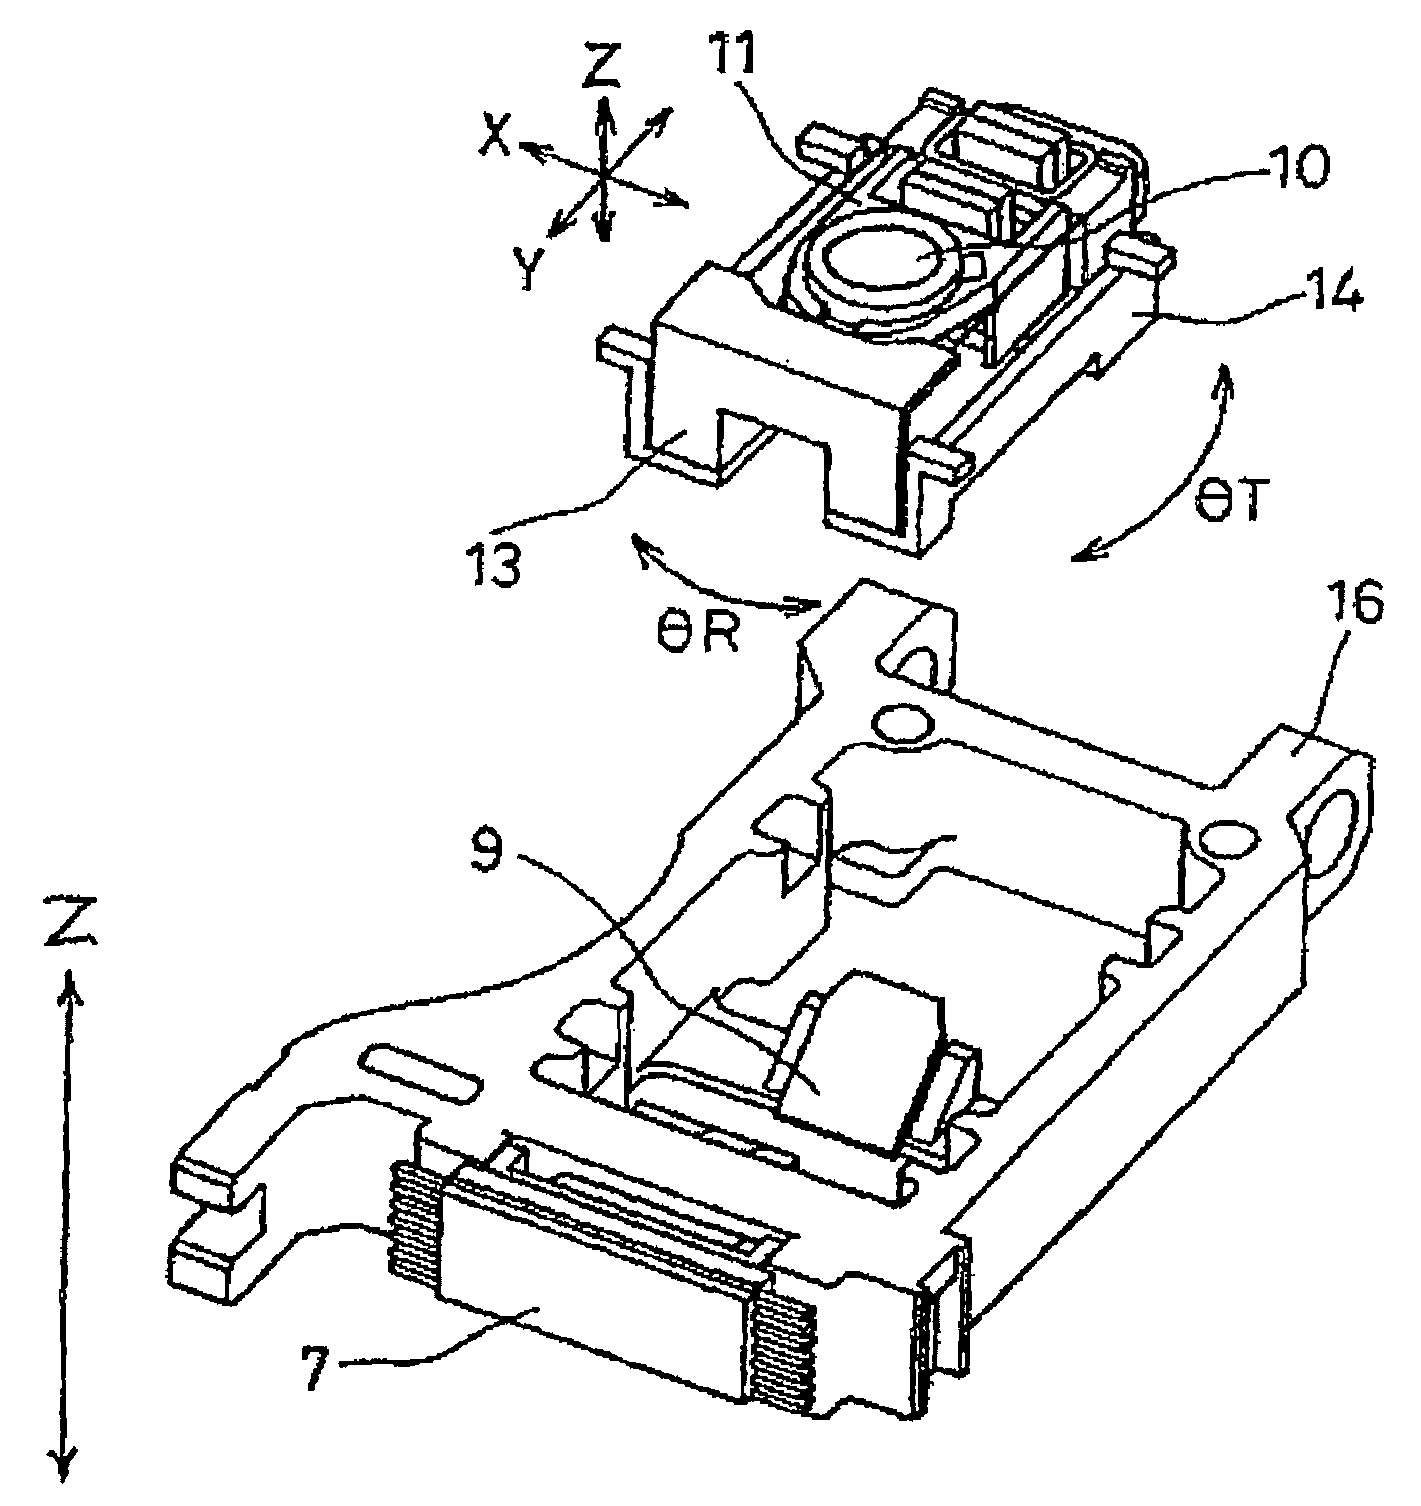 Method of manufacturing optical head